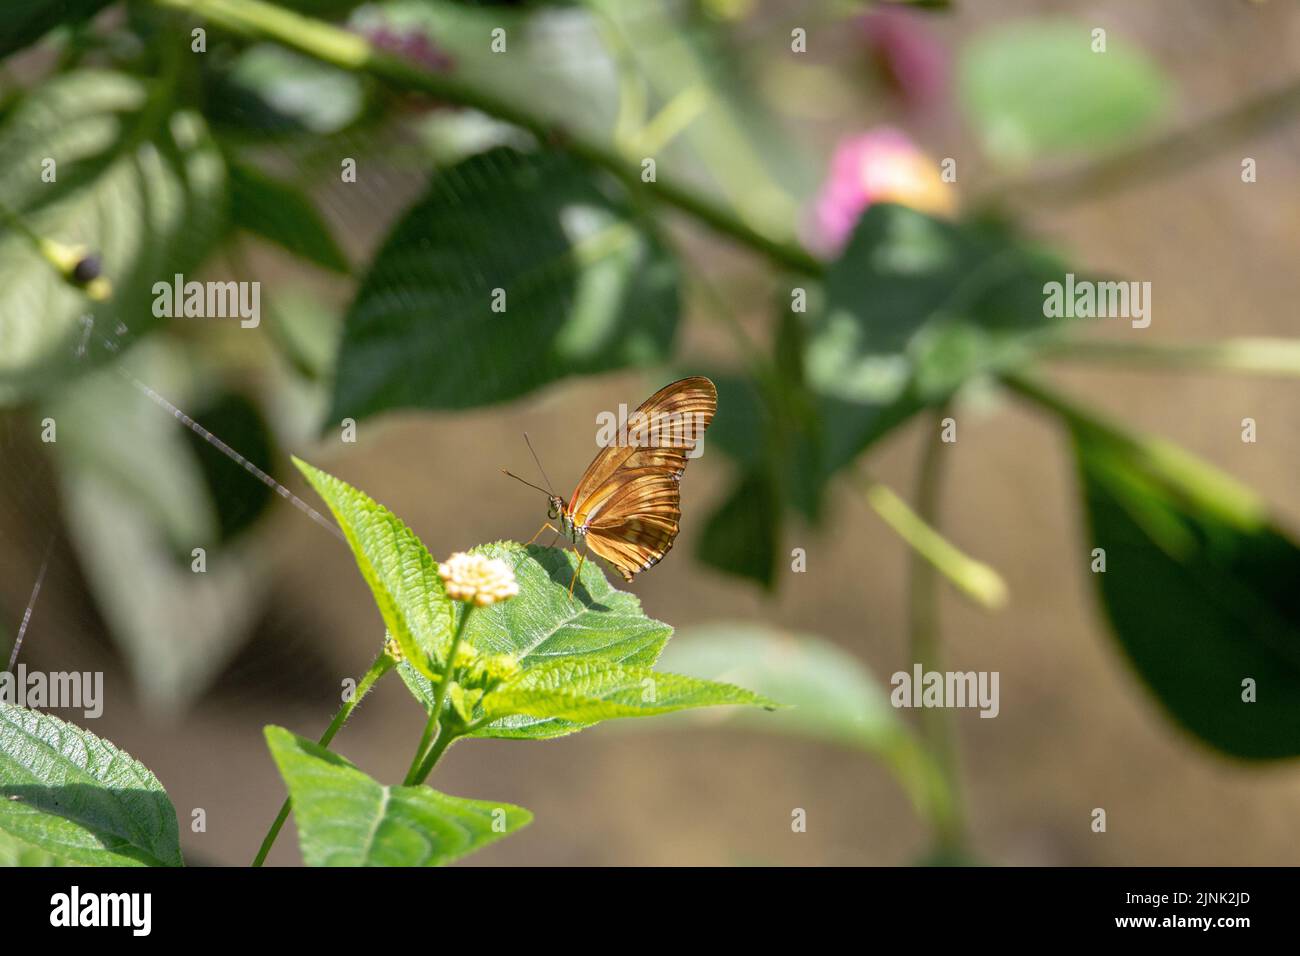 Julia heliconian butterfly (Dryas iulia) resting with half closed wings on a green leaf isolated with tropical green leaves and flowers Stock Photo